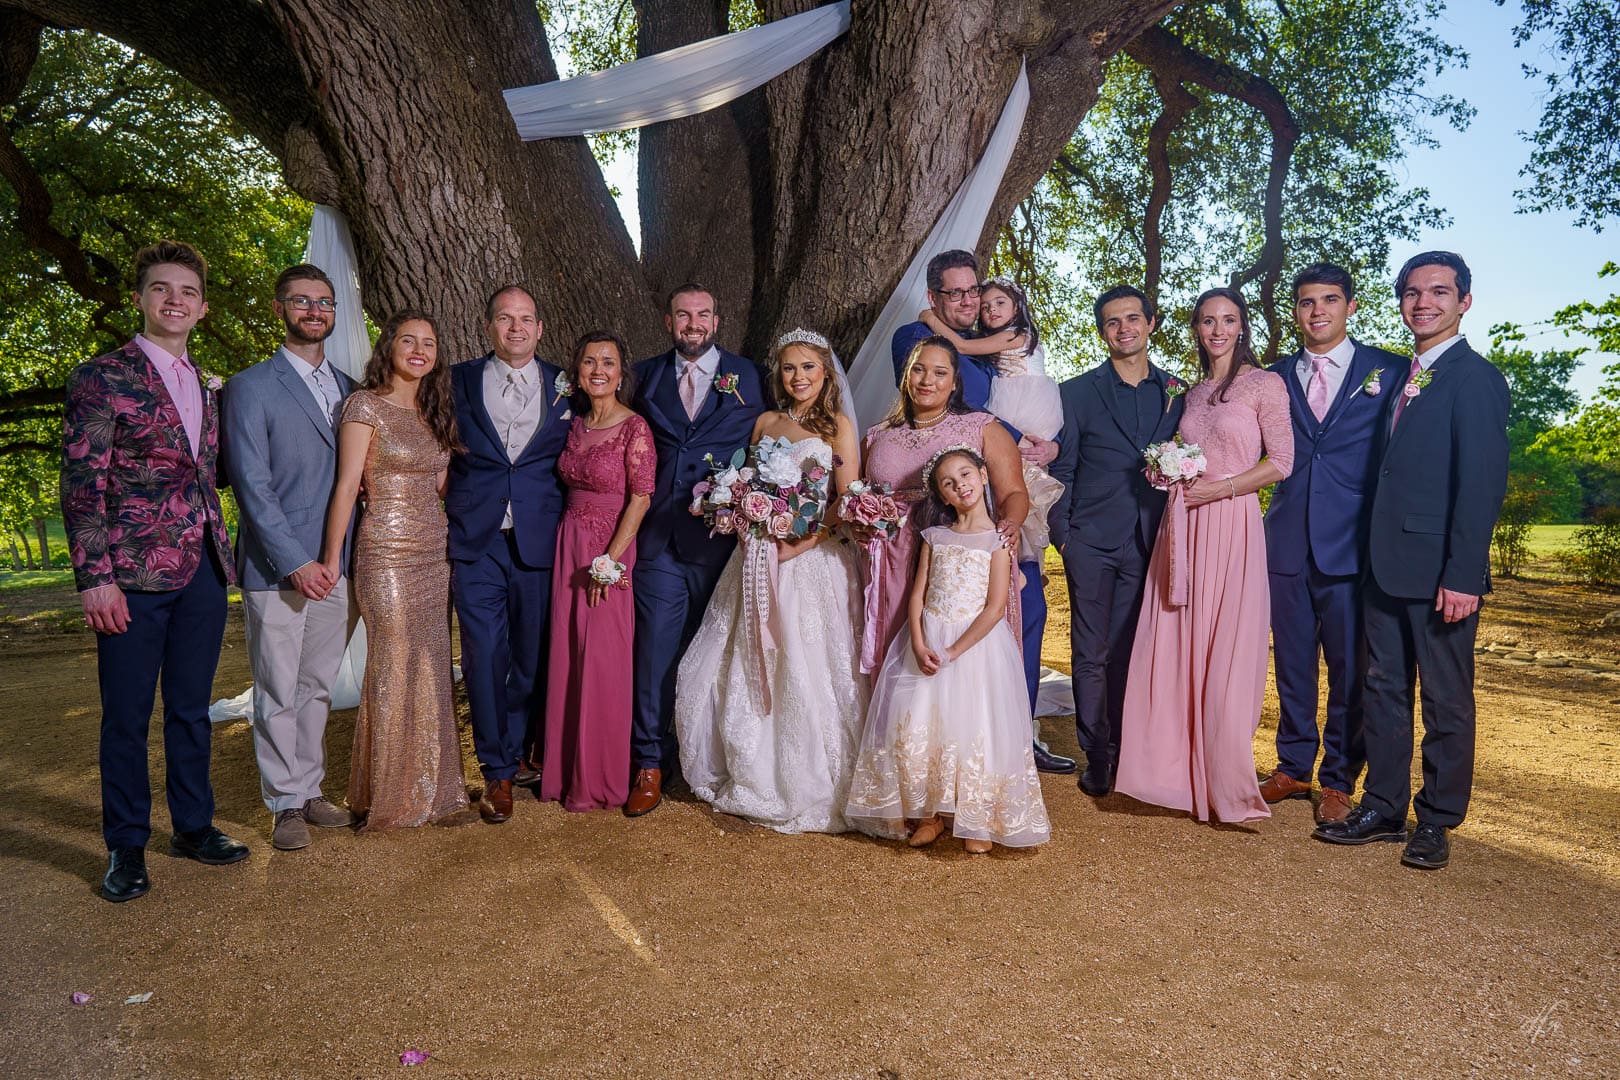 Newlyweds pose with family under a tree.